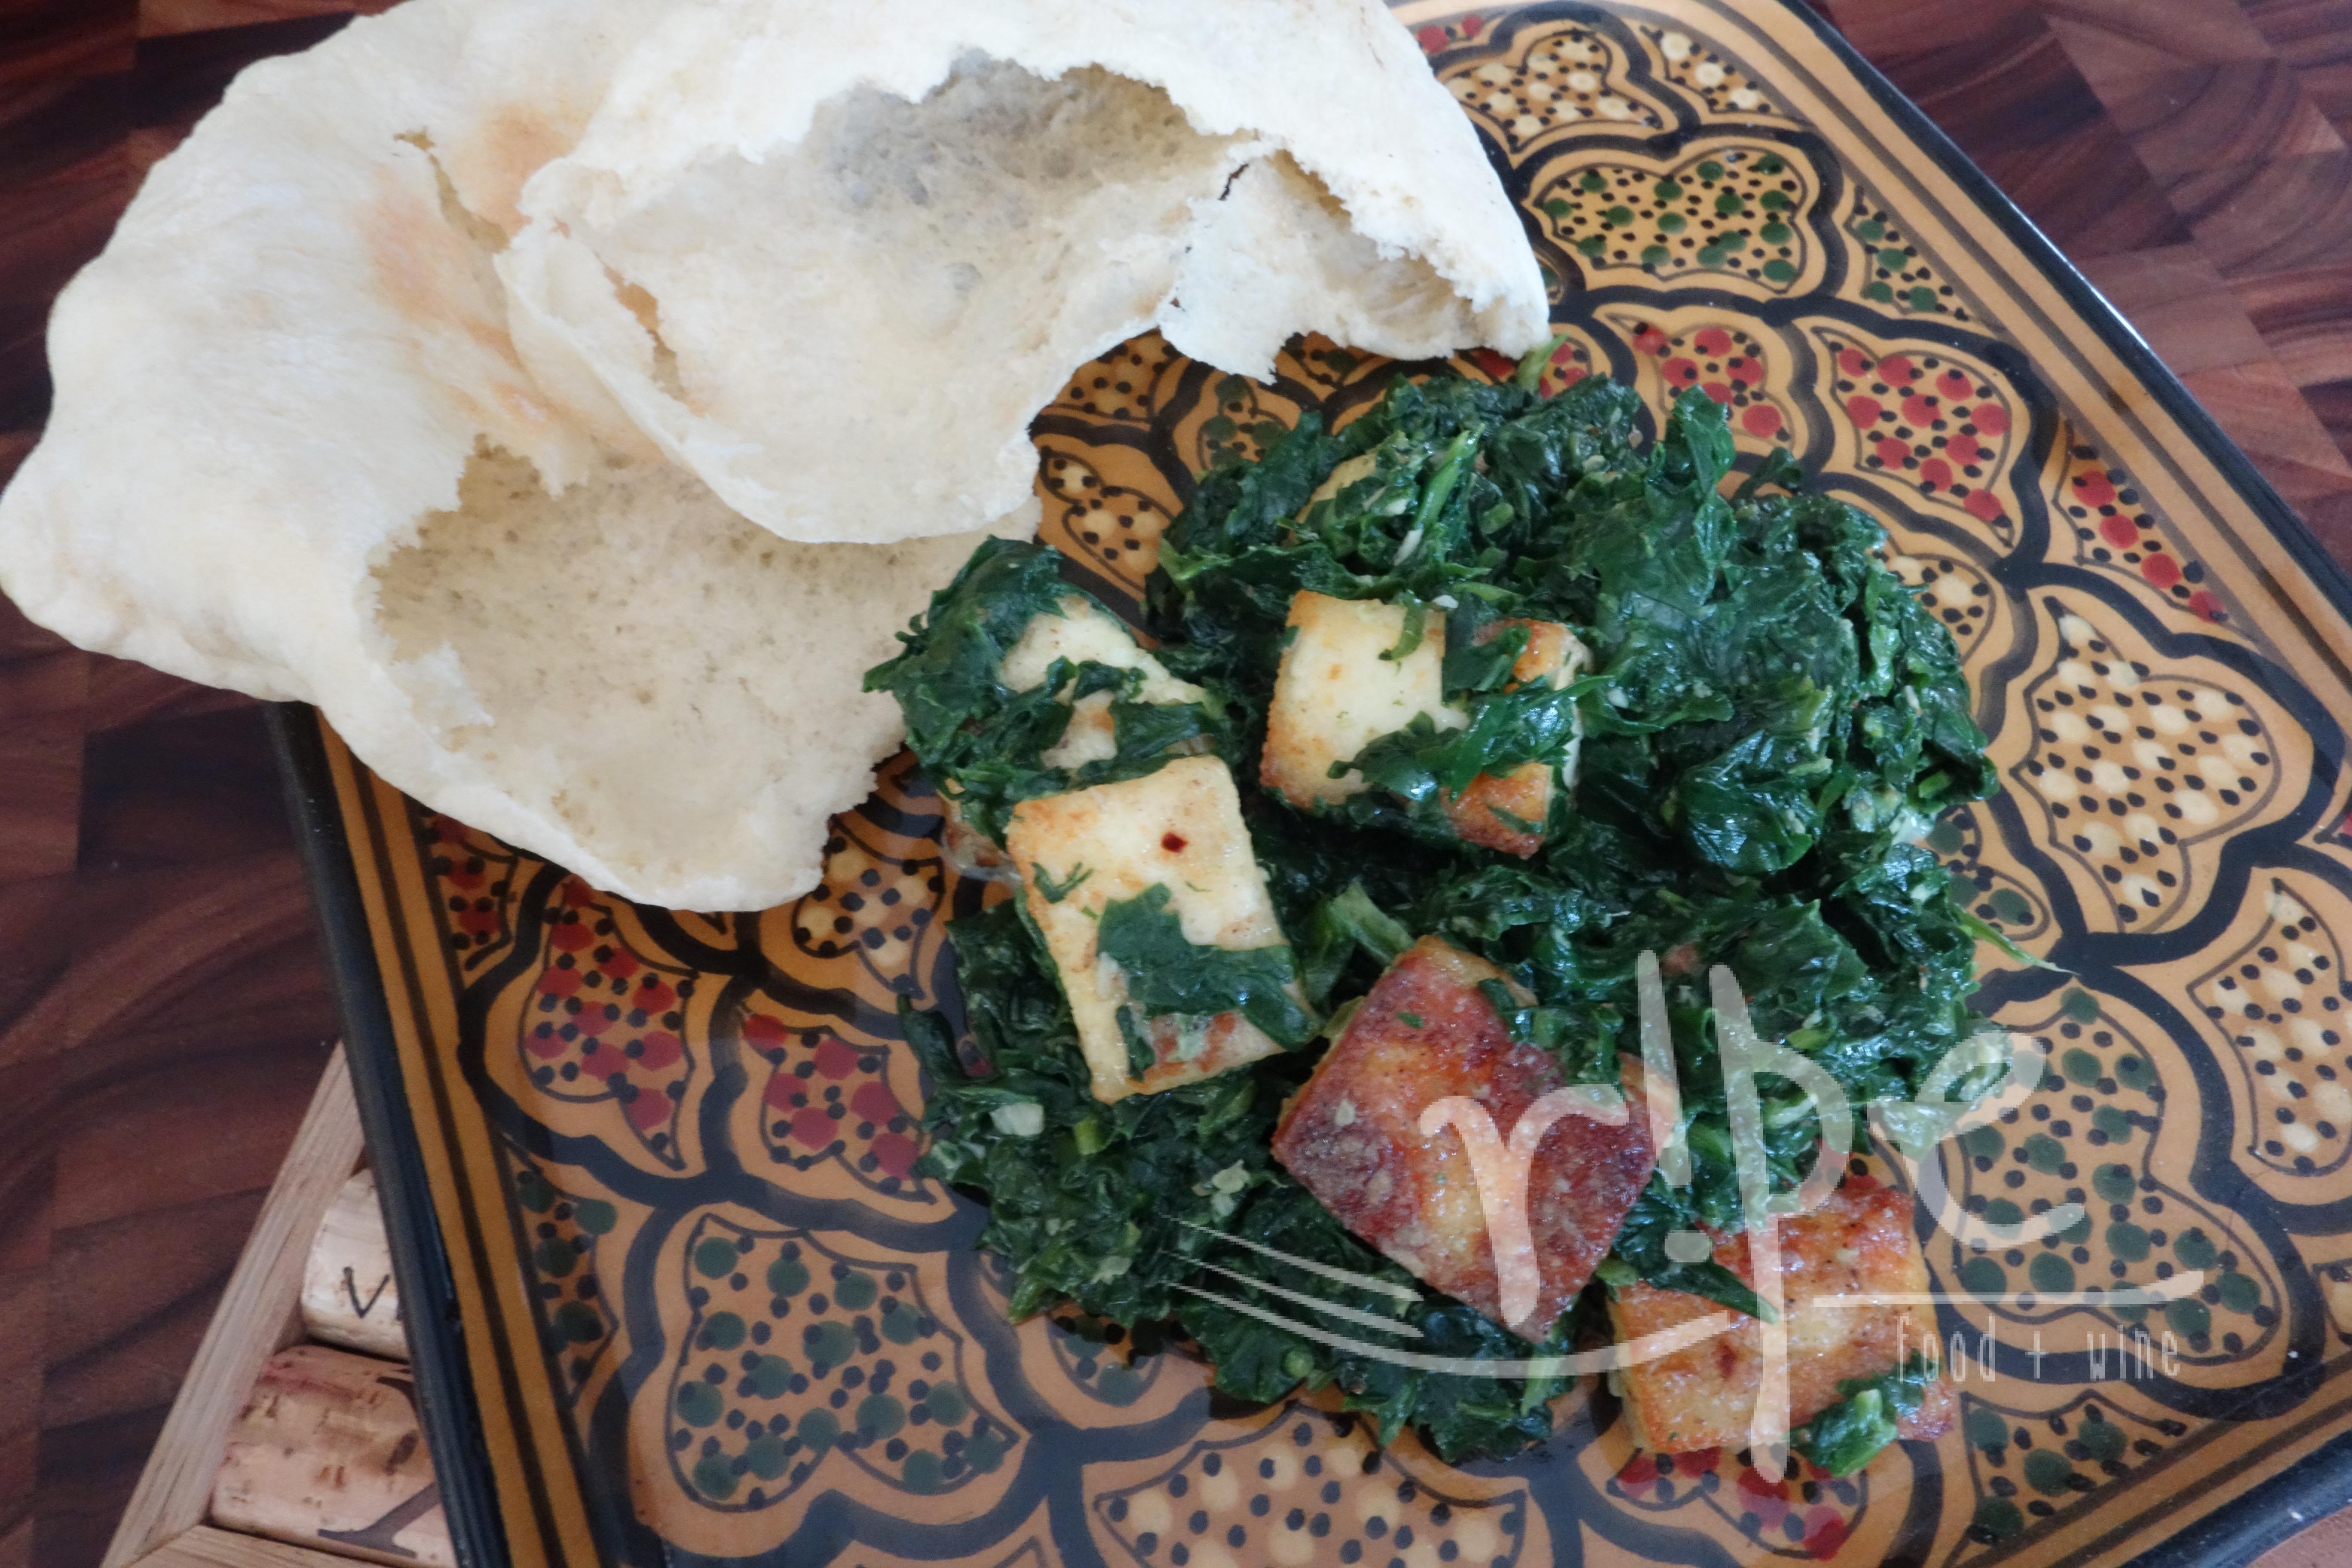 Palak Paneer (Spinach with Cheese)